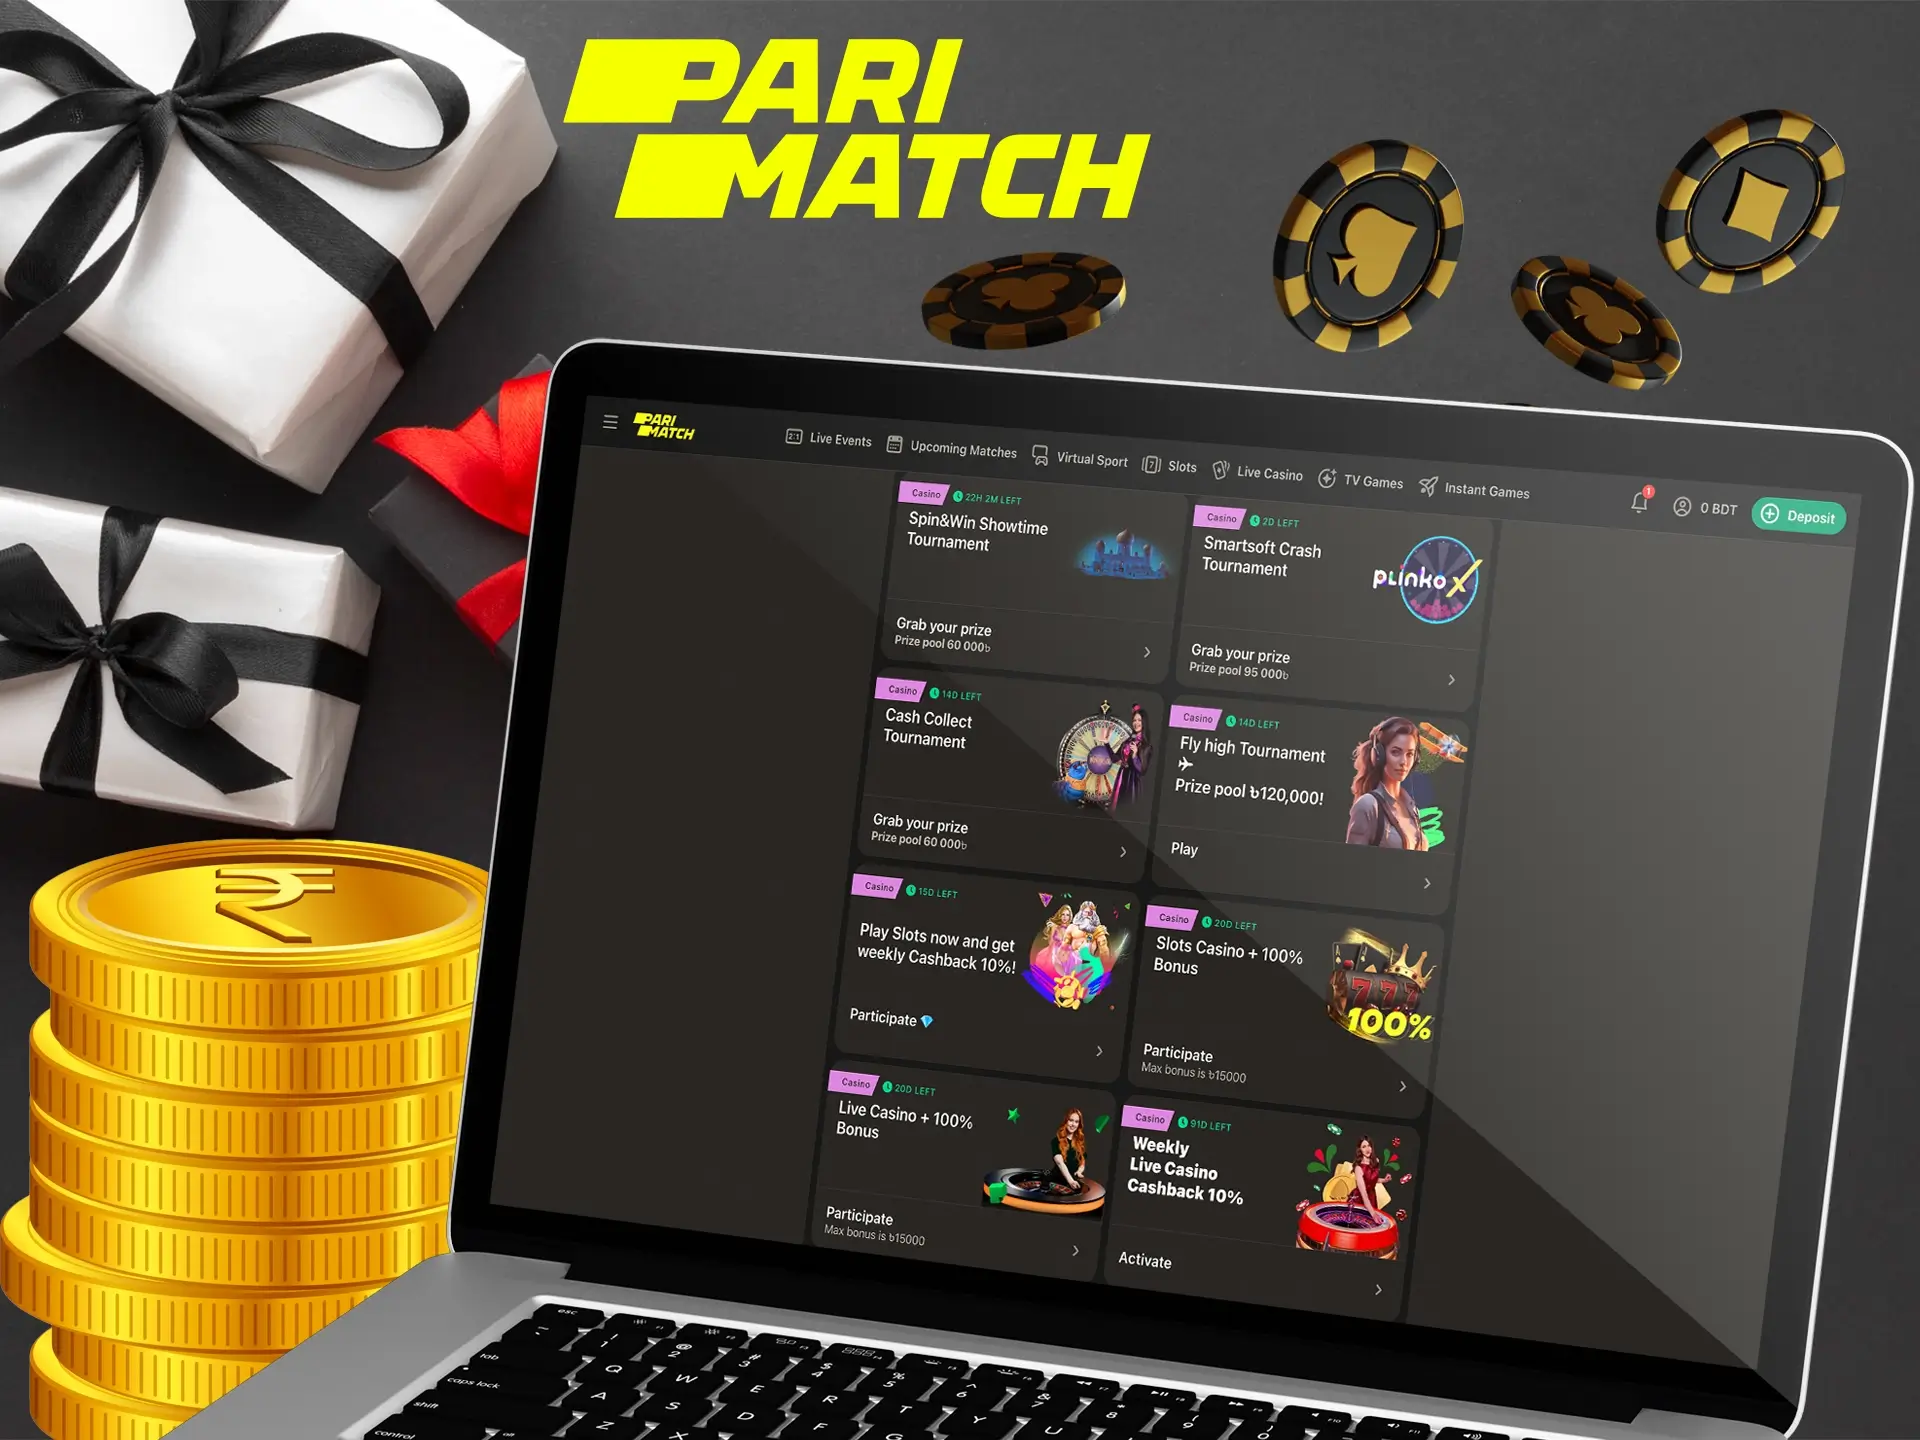 The variety of promotions at Parimatch allows the player to enjoy the game for a long time.